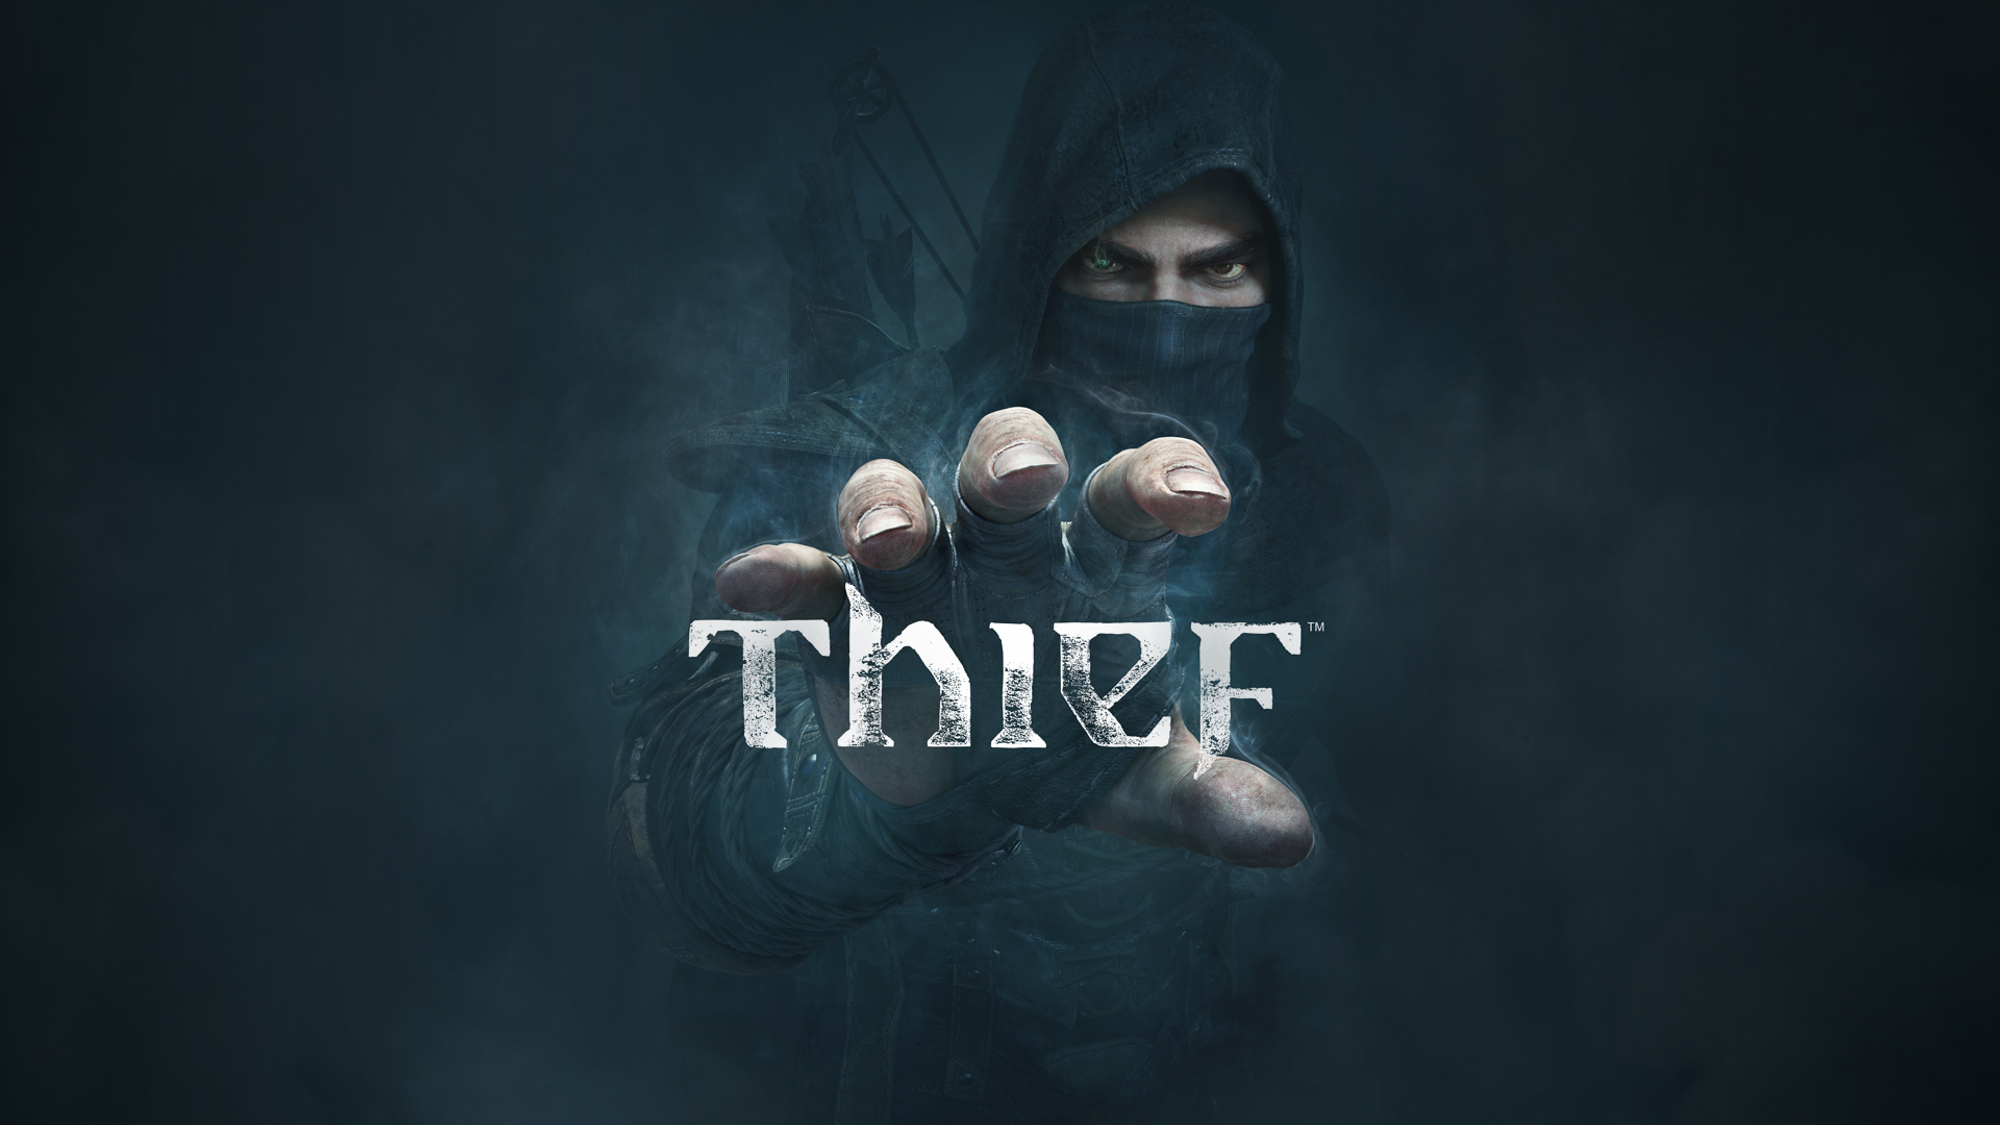 Review - Thief